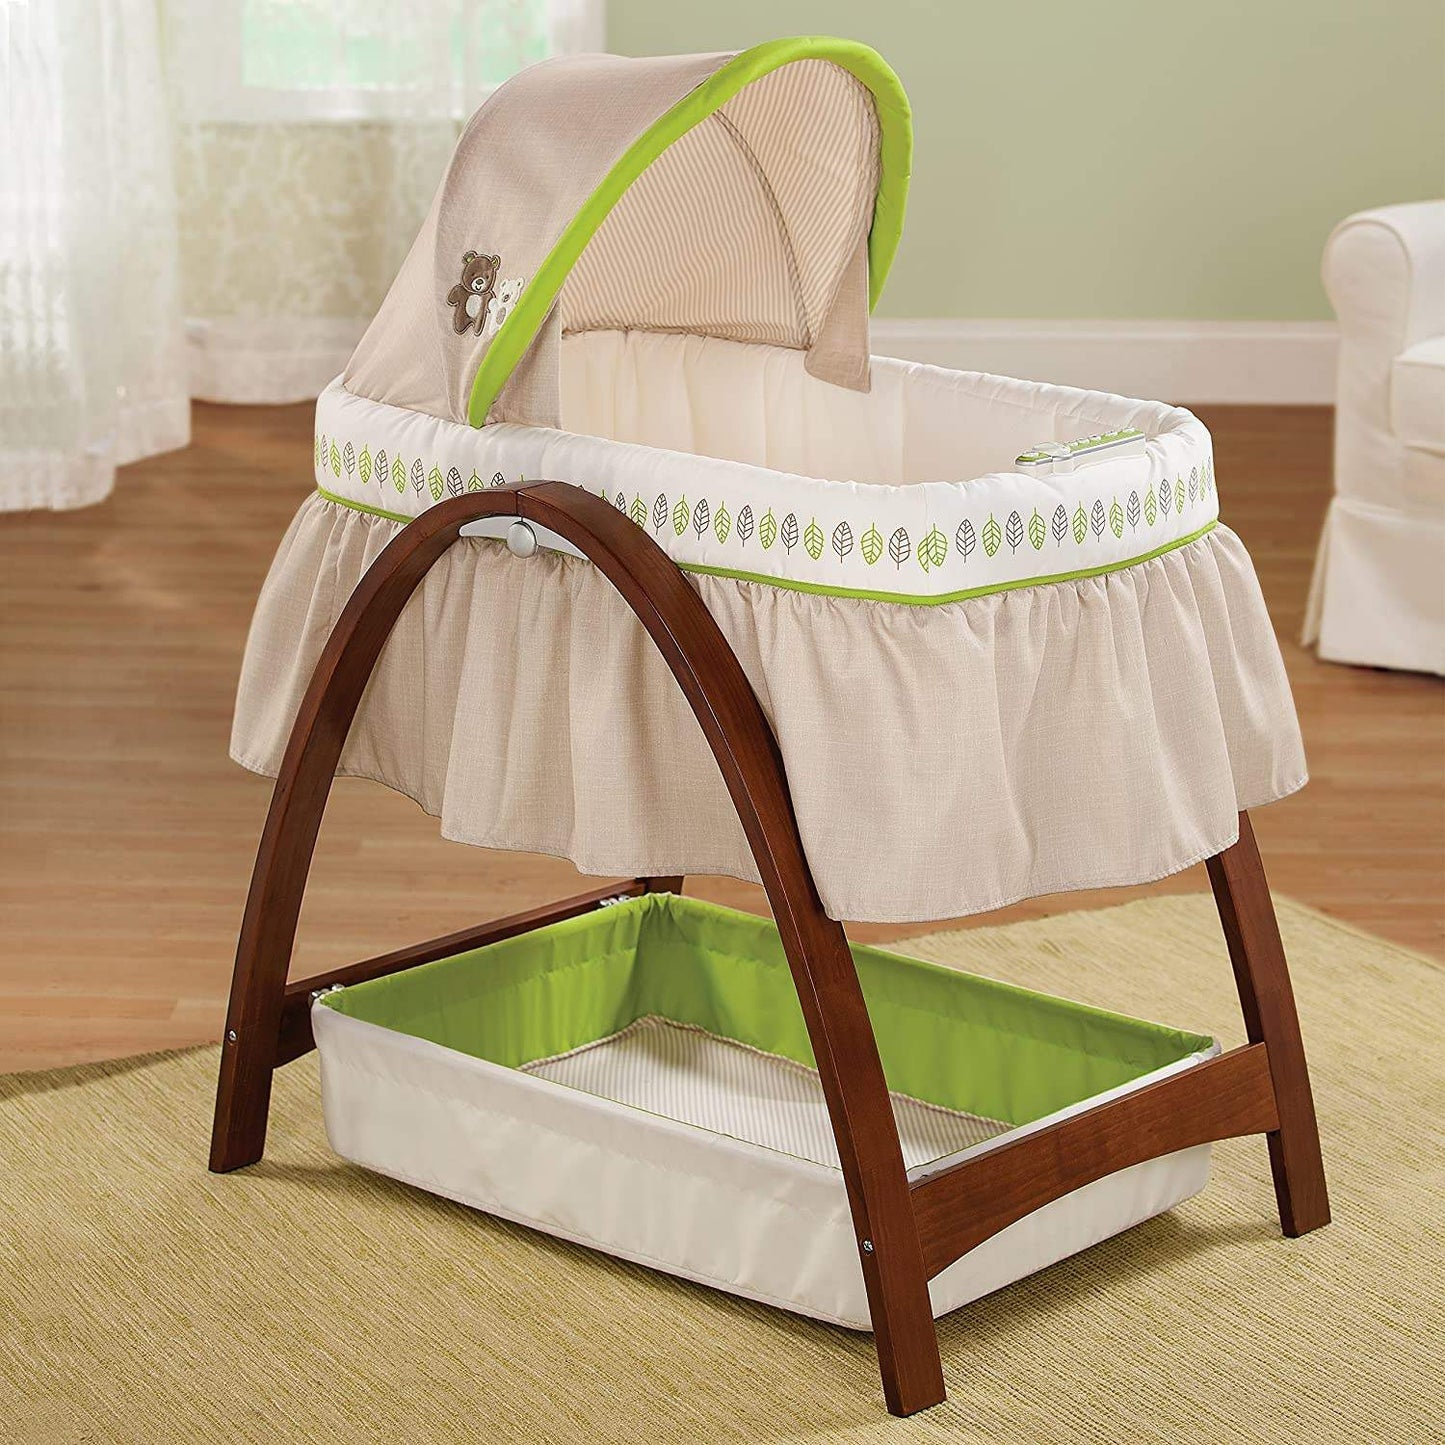 Summer Infant Bentwood Bassinet With Motion || Fashion-White & Green || Used for Birth+ to 6months - Toys4All.in